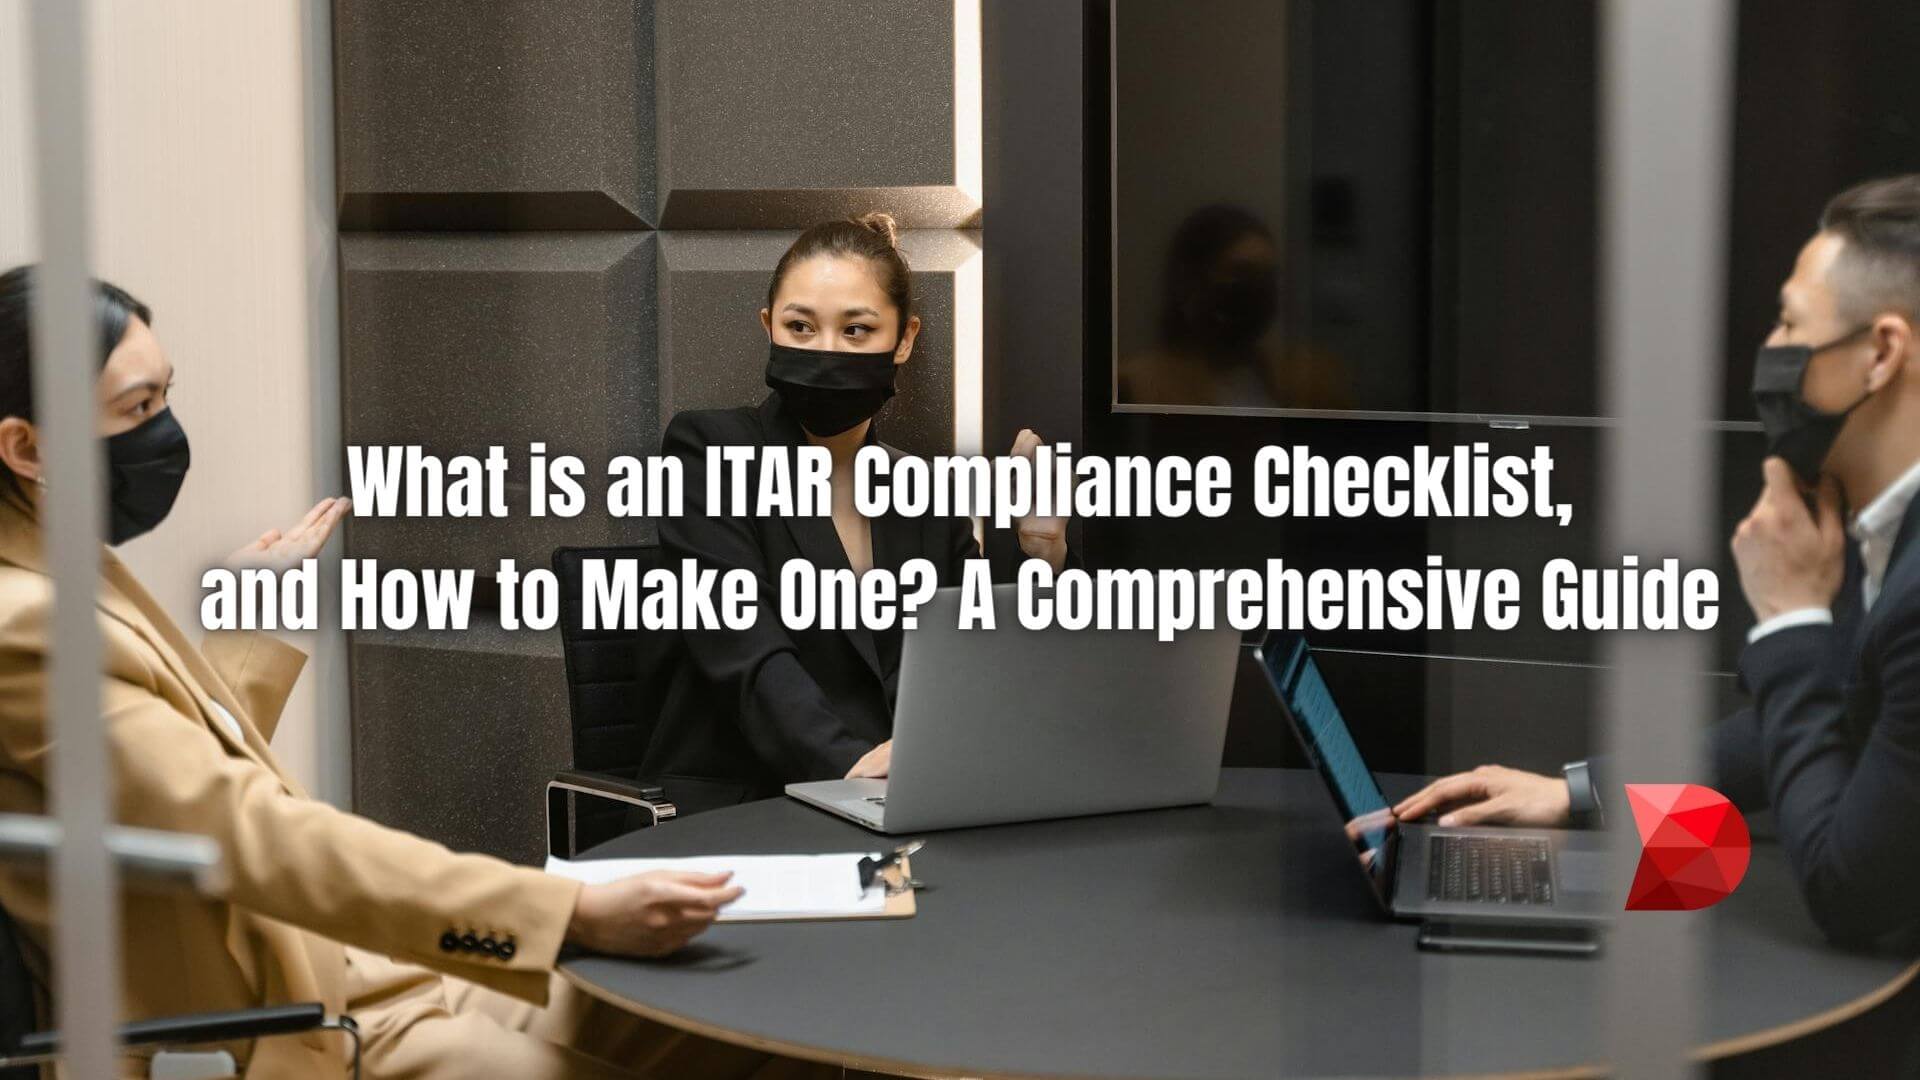 Simplify ITAR compliance with our checklist guide. Learn what to include and how to effectively implement a compliance framework.